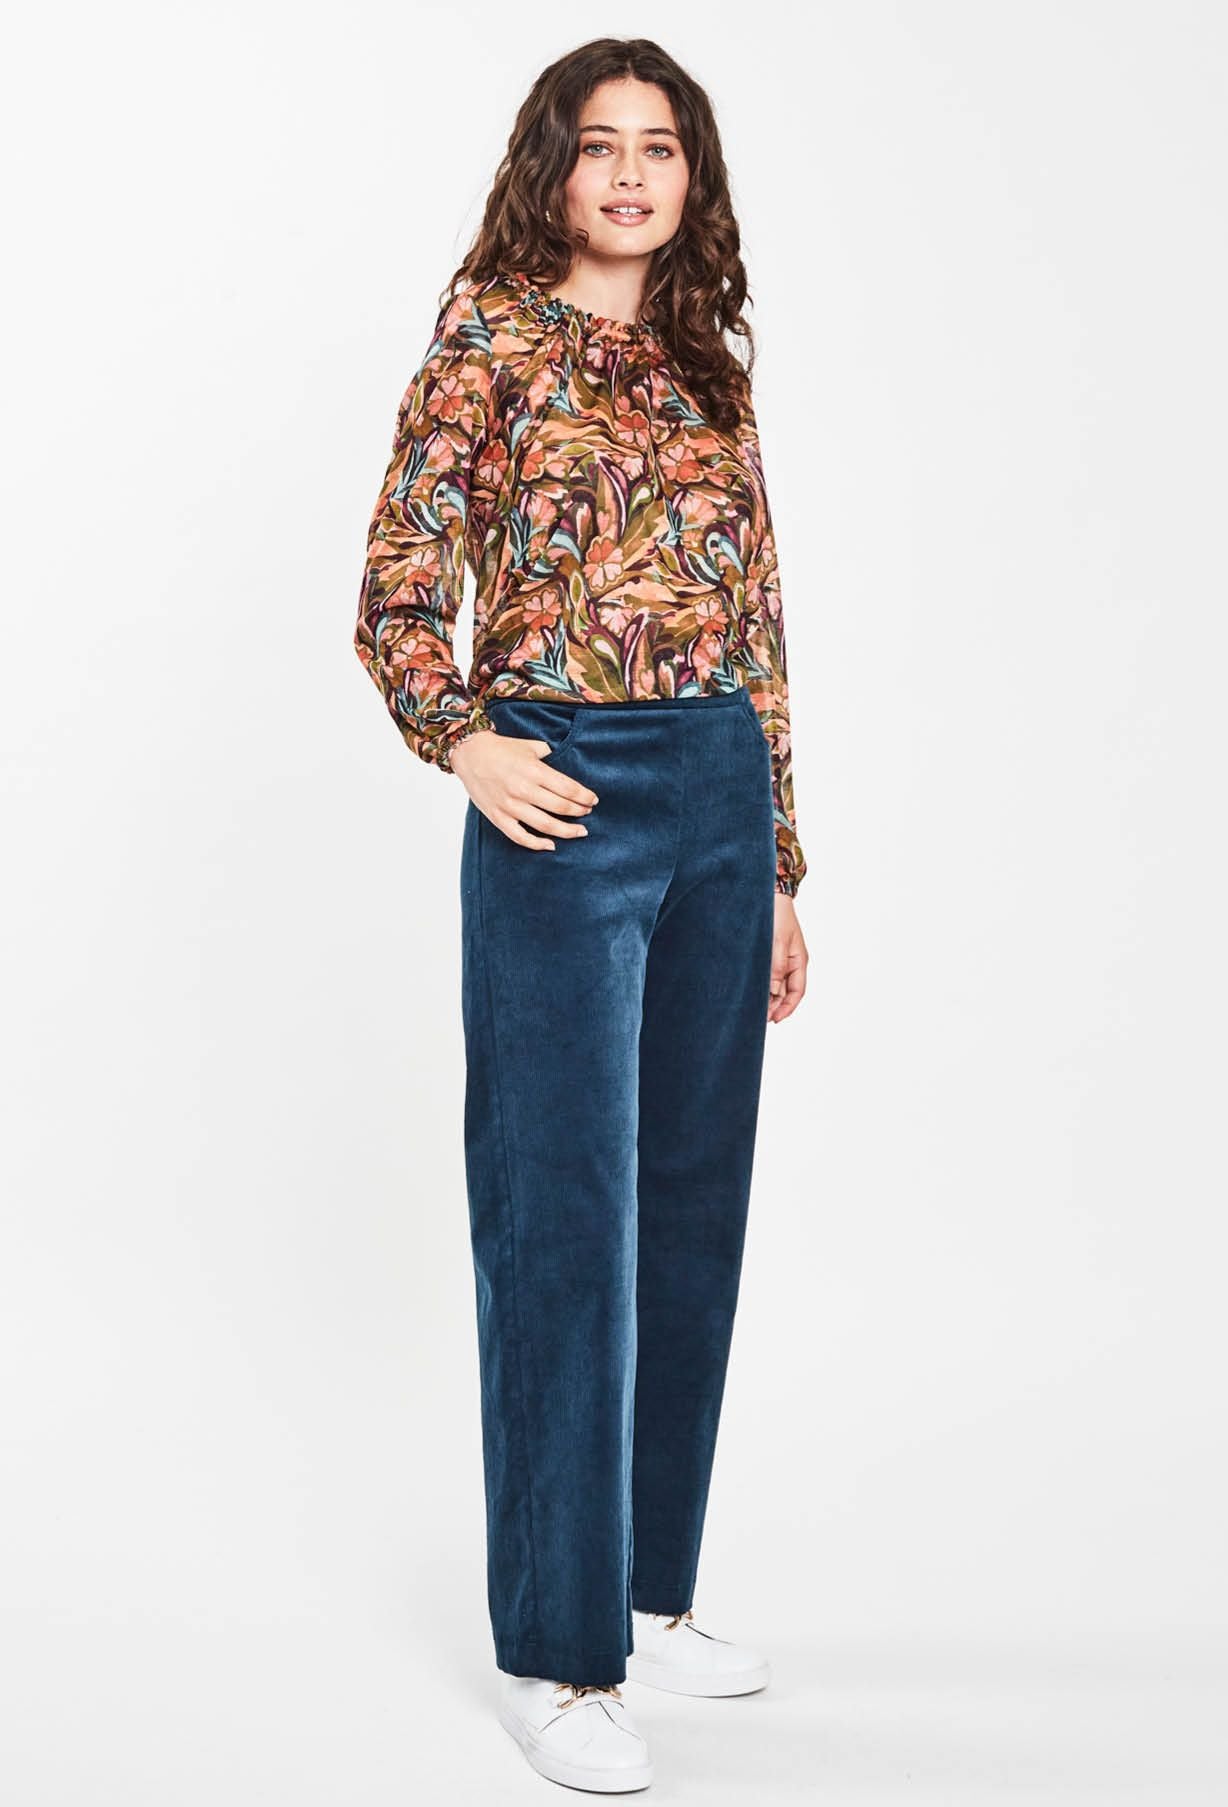 ANNE MARDELL KITTY BLOUSE - FLORENCE - THE VOGUE STORE